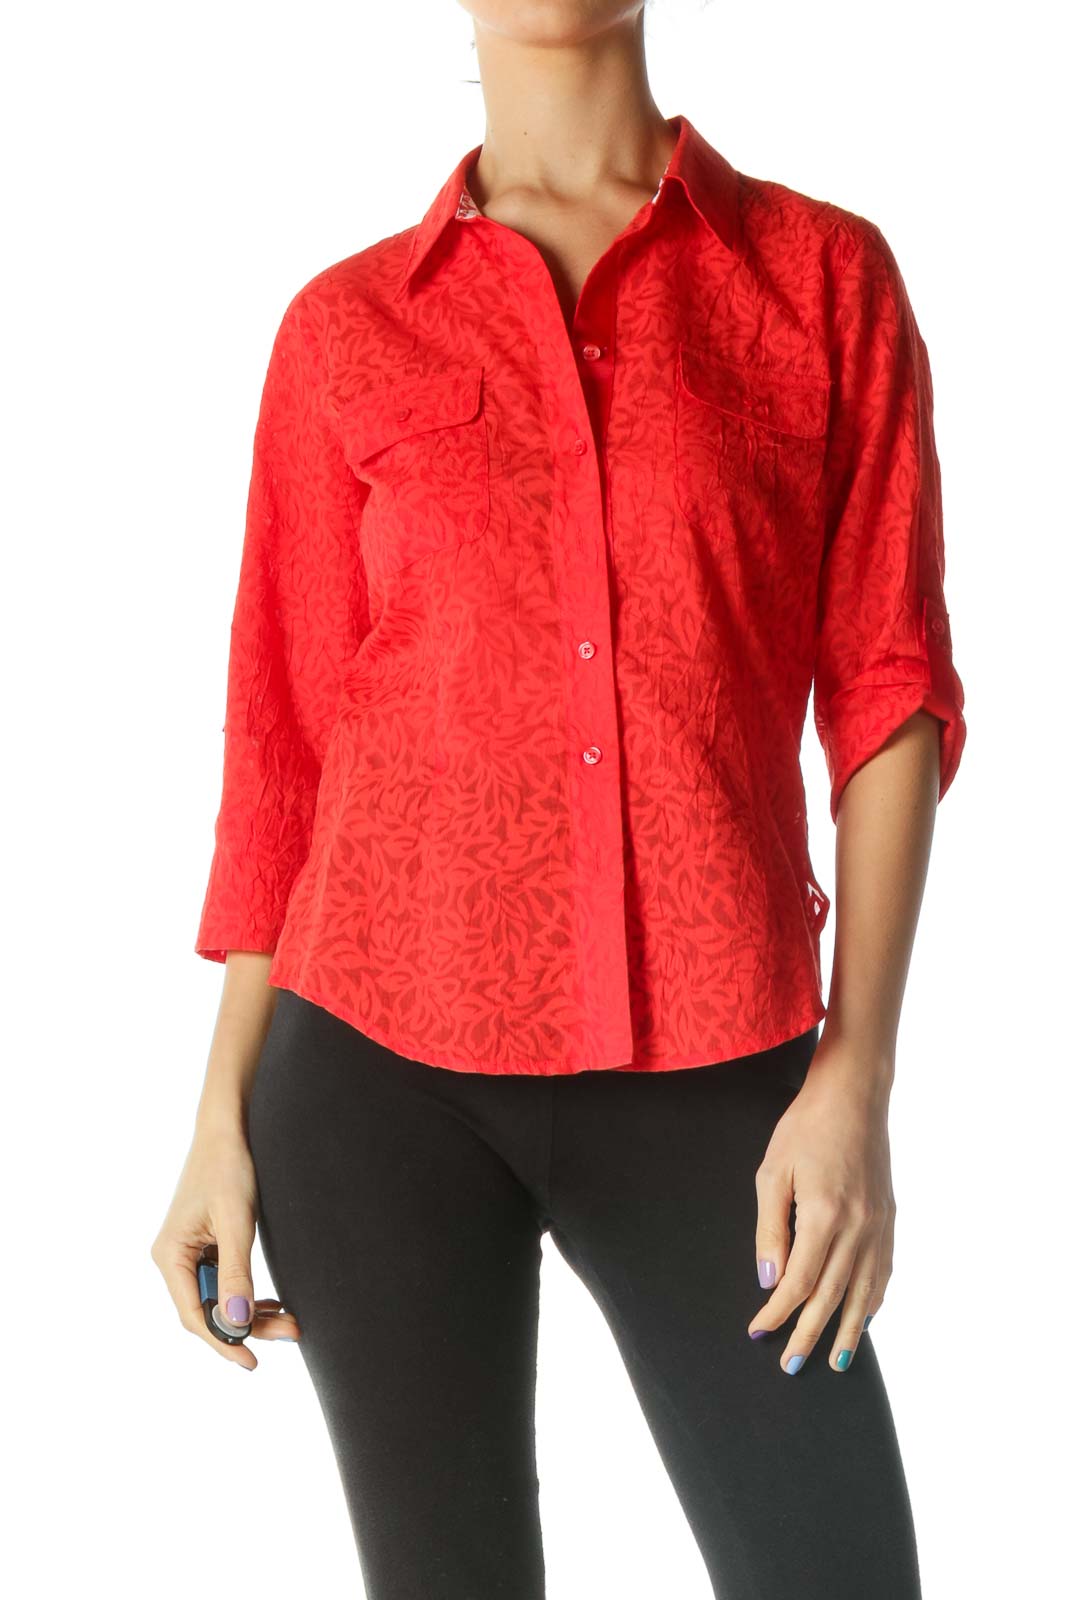 Red Floral 3/4 Sleeve Collared Shirt Front